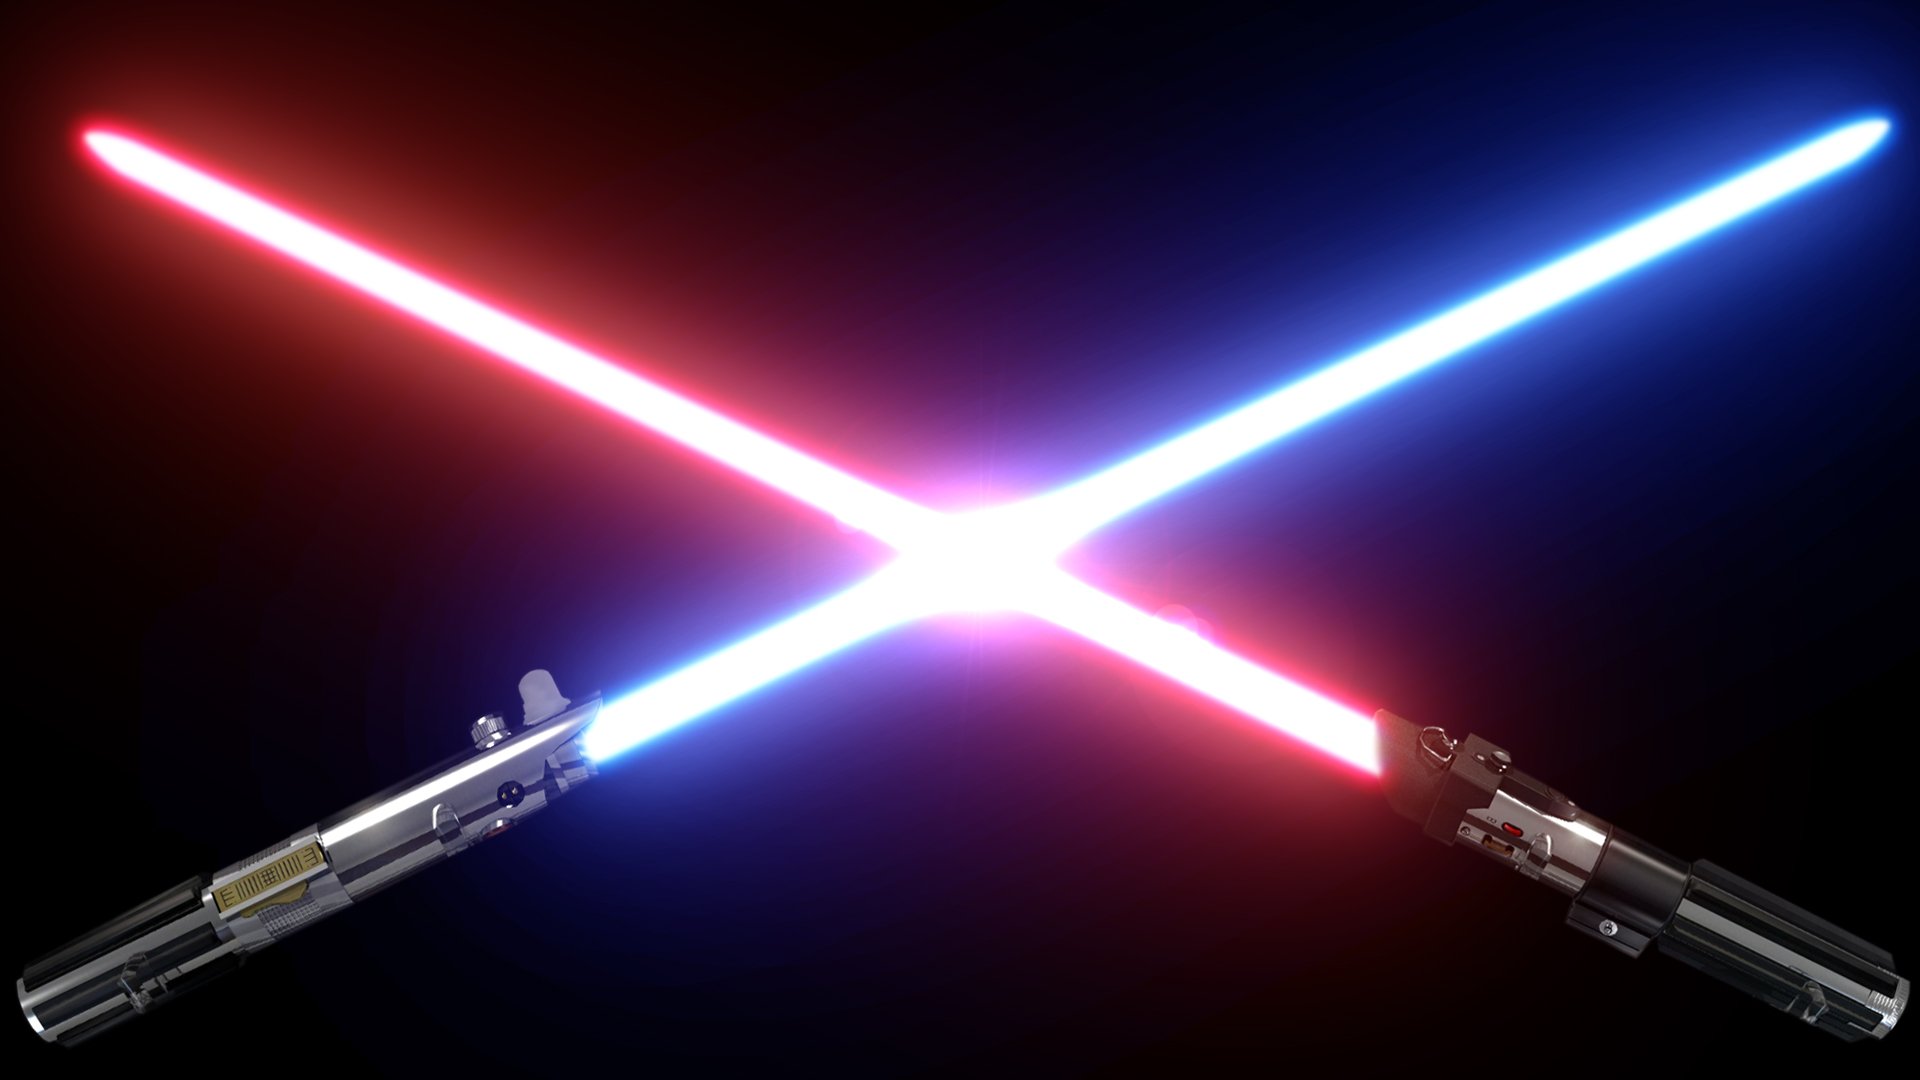 How Many Times Is “Lightsaber” Said in Star Wars? [Video]